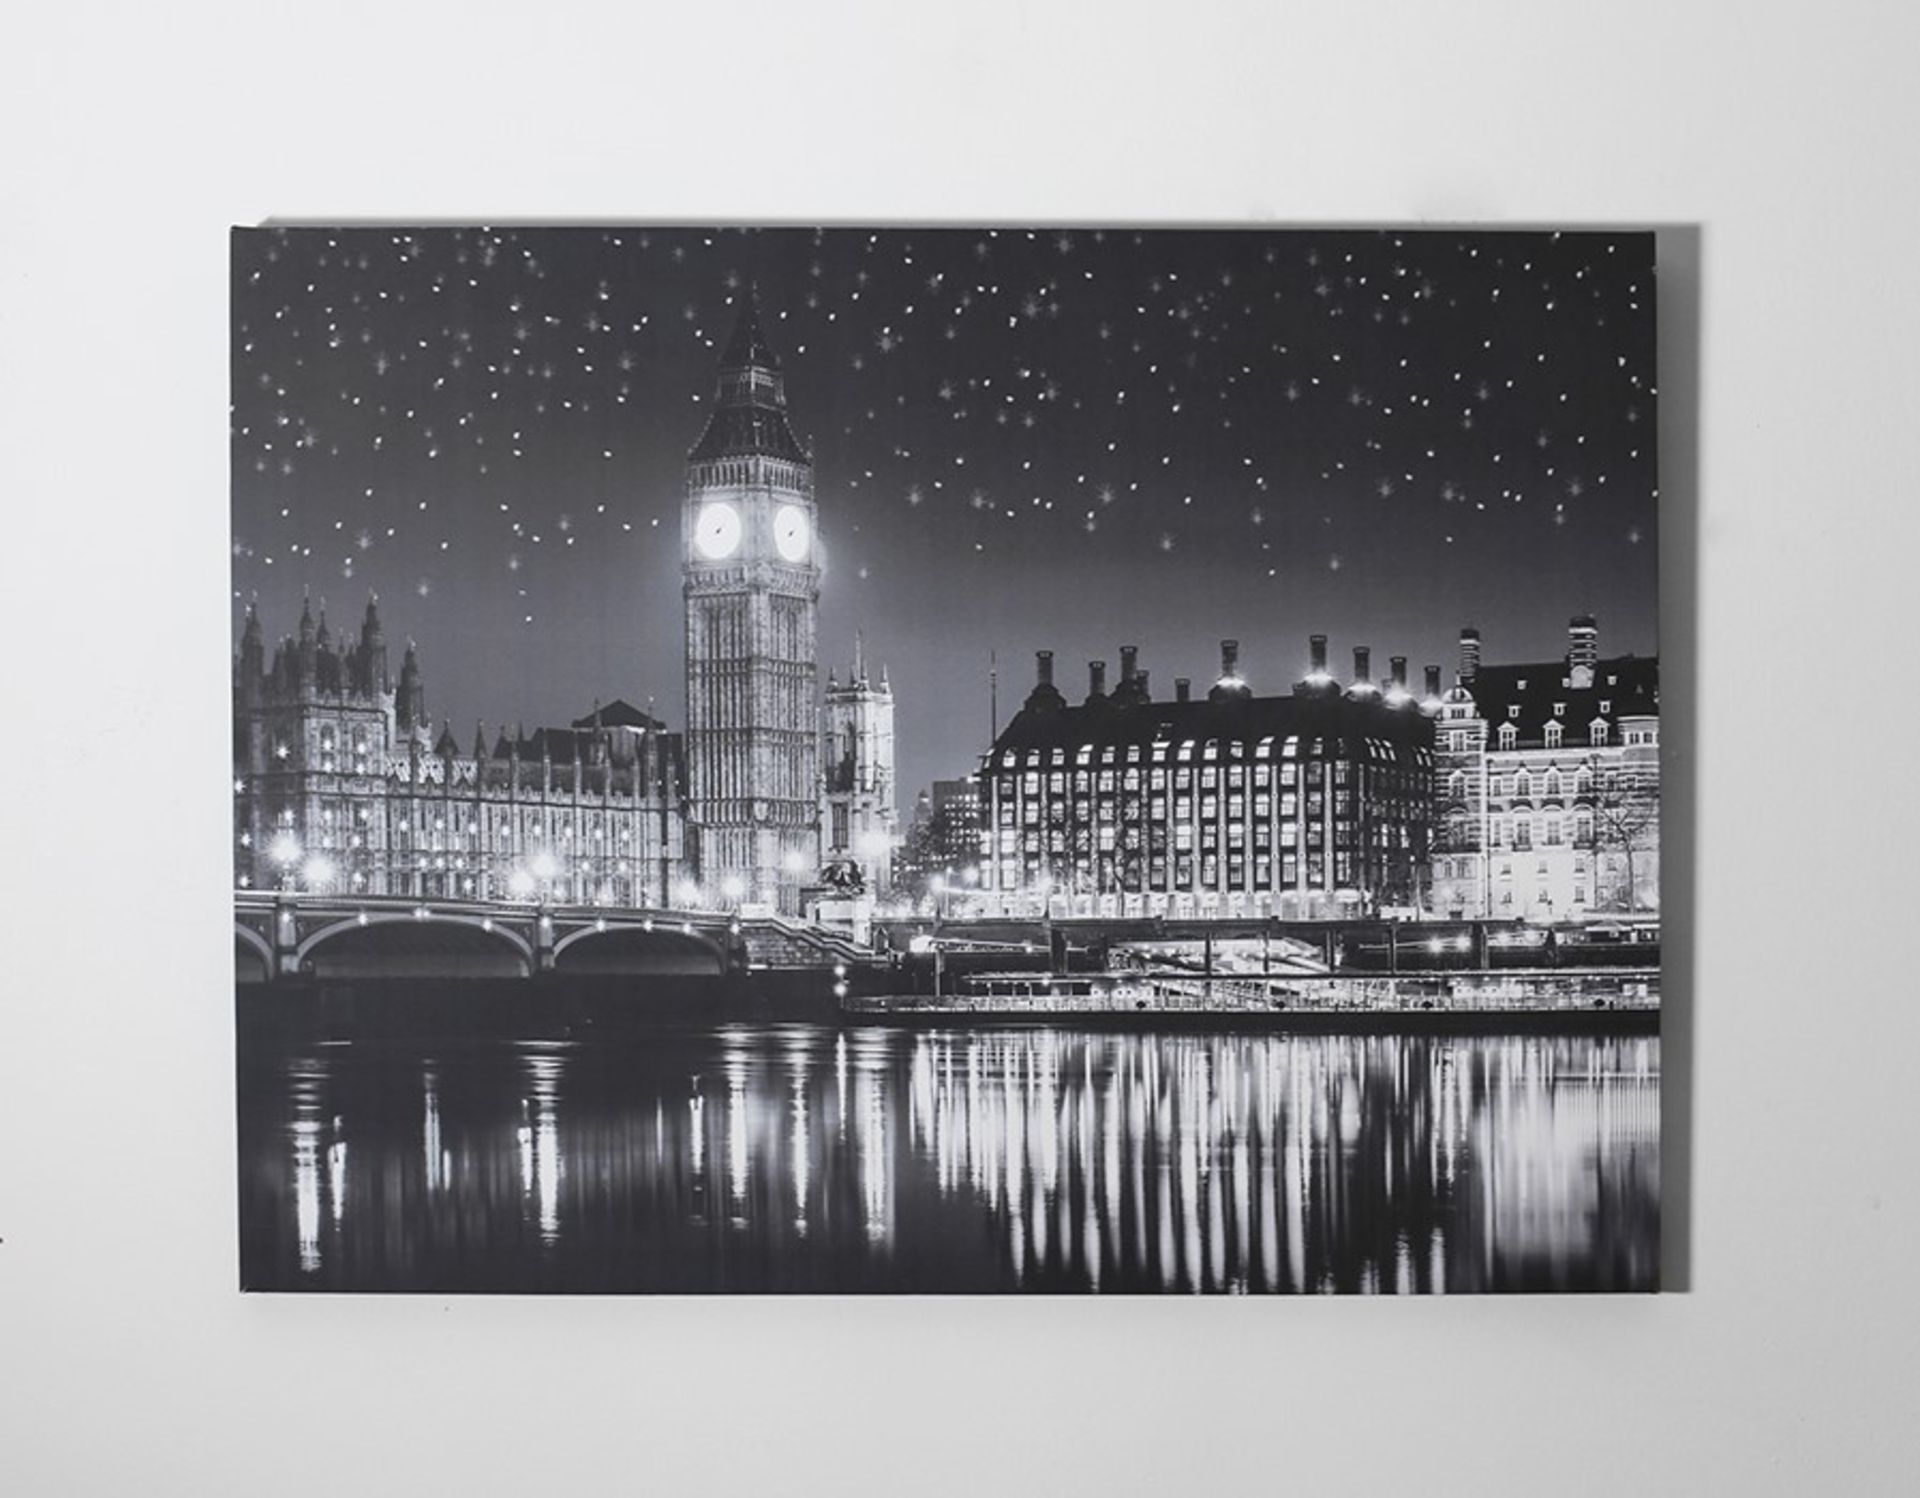 1 BRAND NEW BOXED ARTHOUSE LONDON SCENE PRINTED CANVAS, 57CM X 77CM / RRP £18.99 (VIEWING HIGHLY